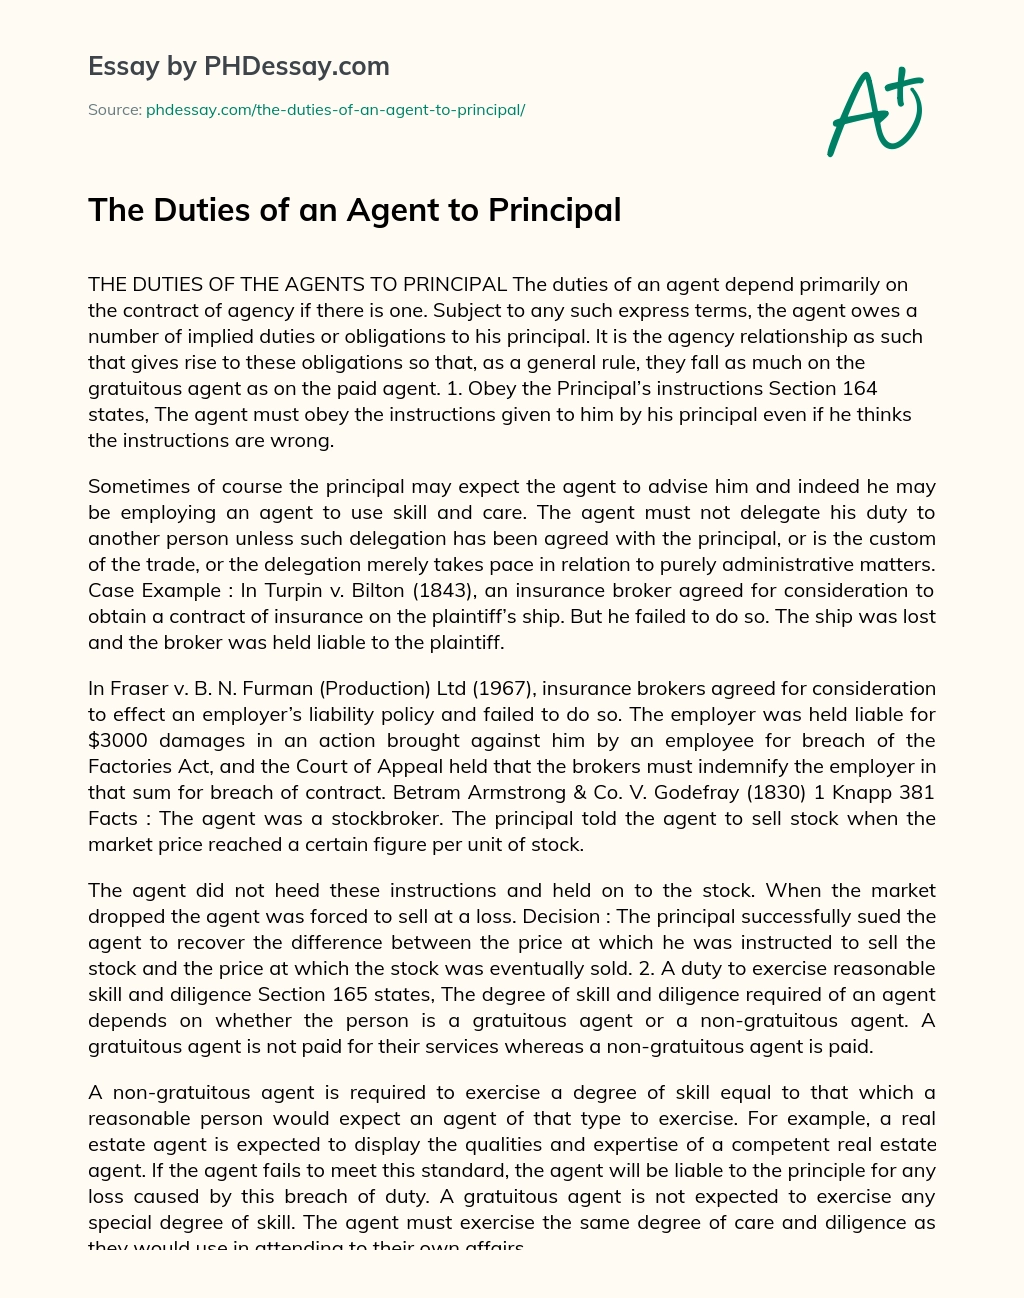 The Duties of an Agent to Principal essay